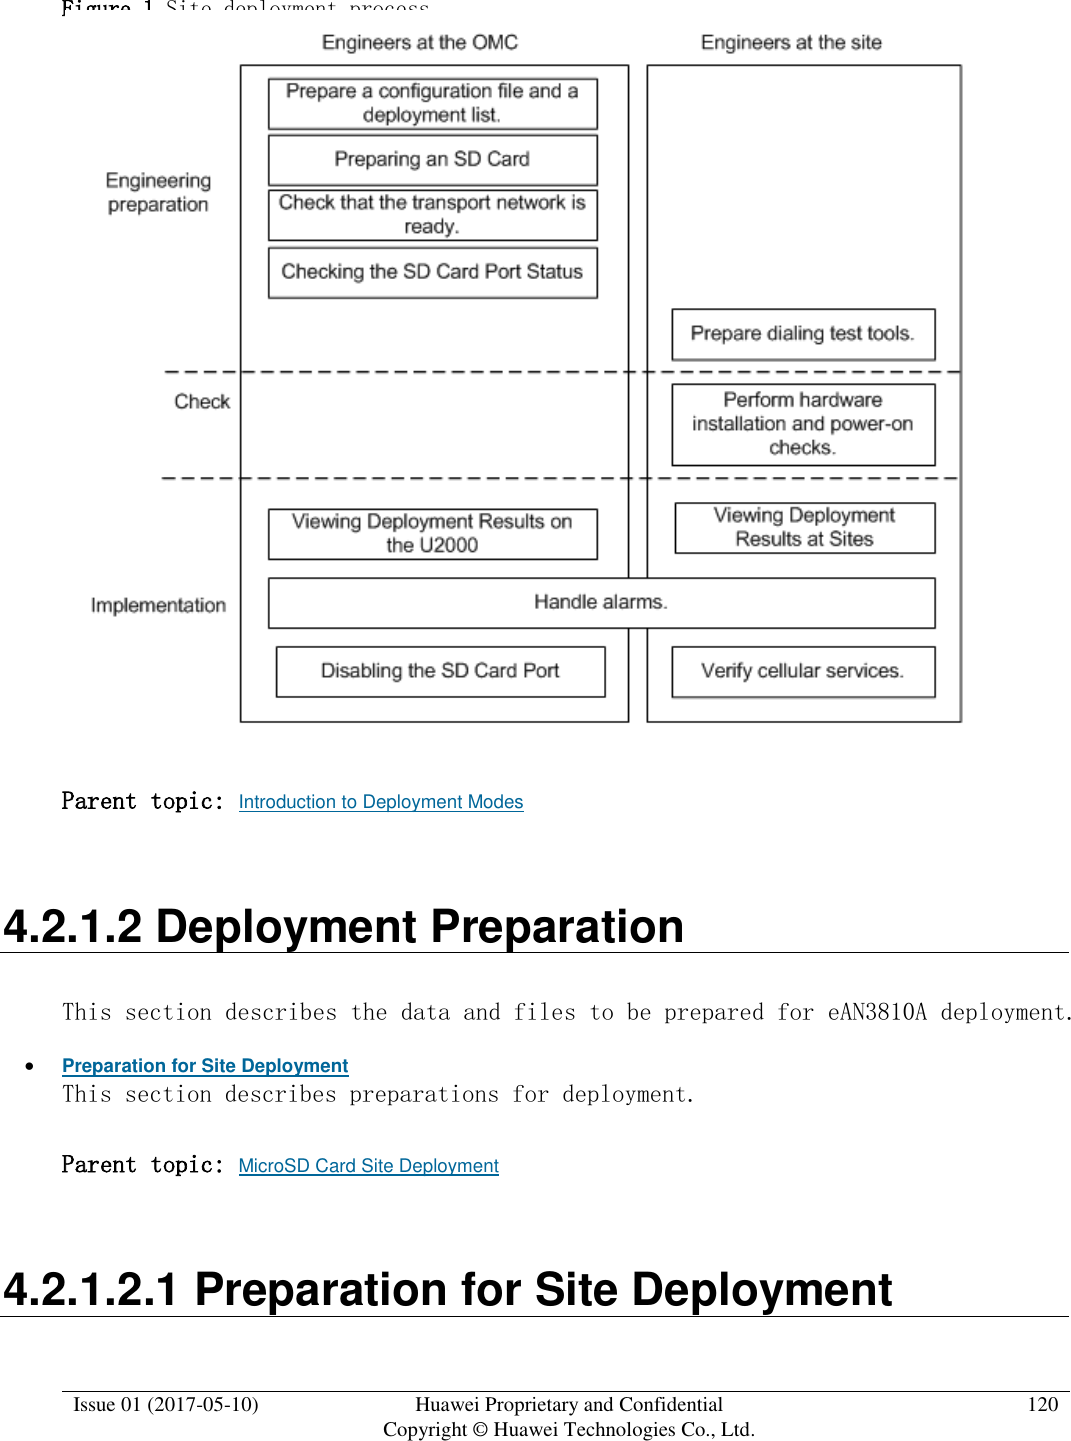  Issue 01 (2017-05-10) Huawei Proprietary and Confidential      Copyright © Huawei Technologies Co., Ltd. 120  Figure 1 Site deployment process   Parent topic: Introduction to Deployment Modes 4.2.1.2 Deployment Preparation  This section describes the data and files to be prepared for eAN3810A deployment.   Preparation for Site Deployment This section describes preparations for deployment.  Parent topic: MicroSD Card Site Deployment 4.2.1.2.1 Preparation for Site Deployment 